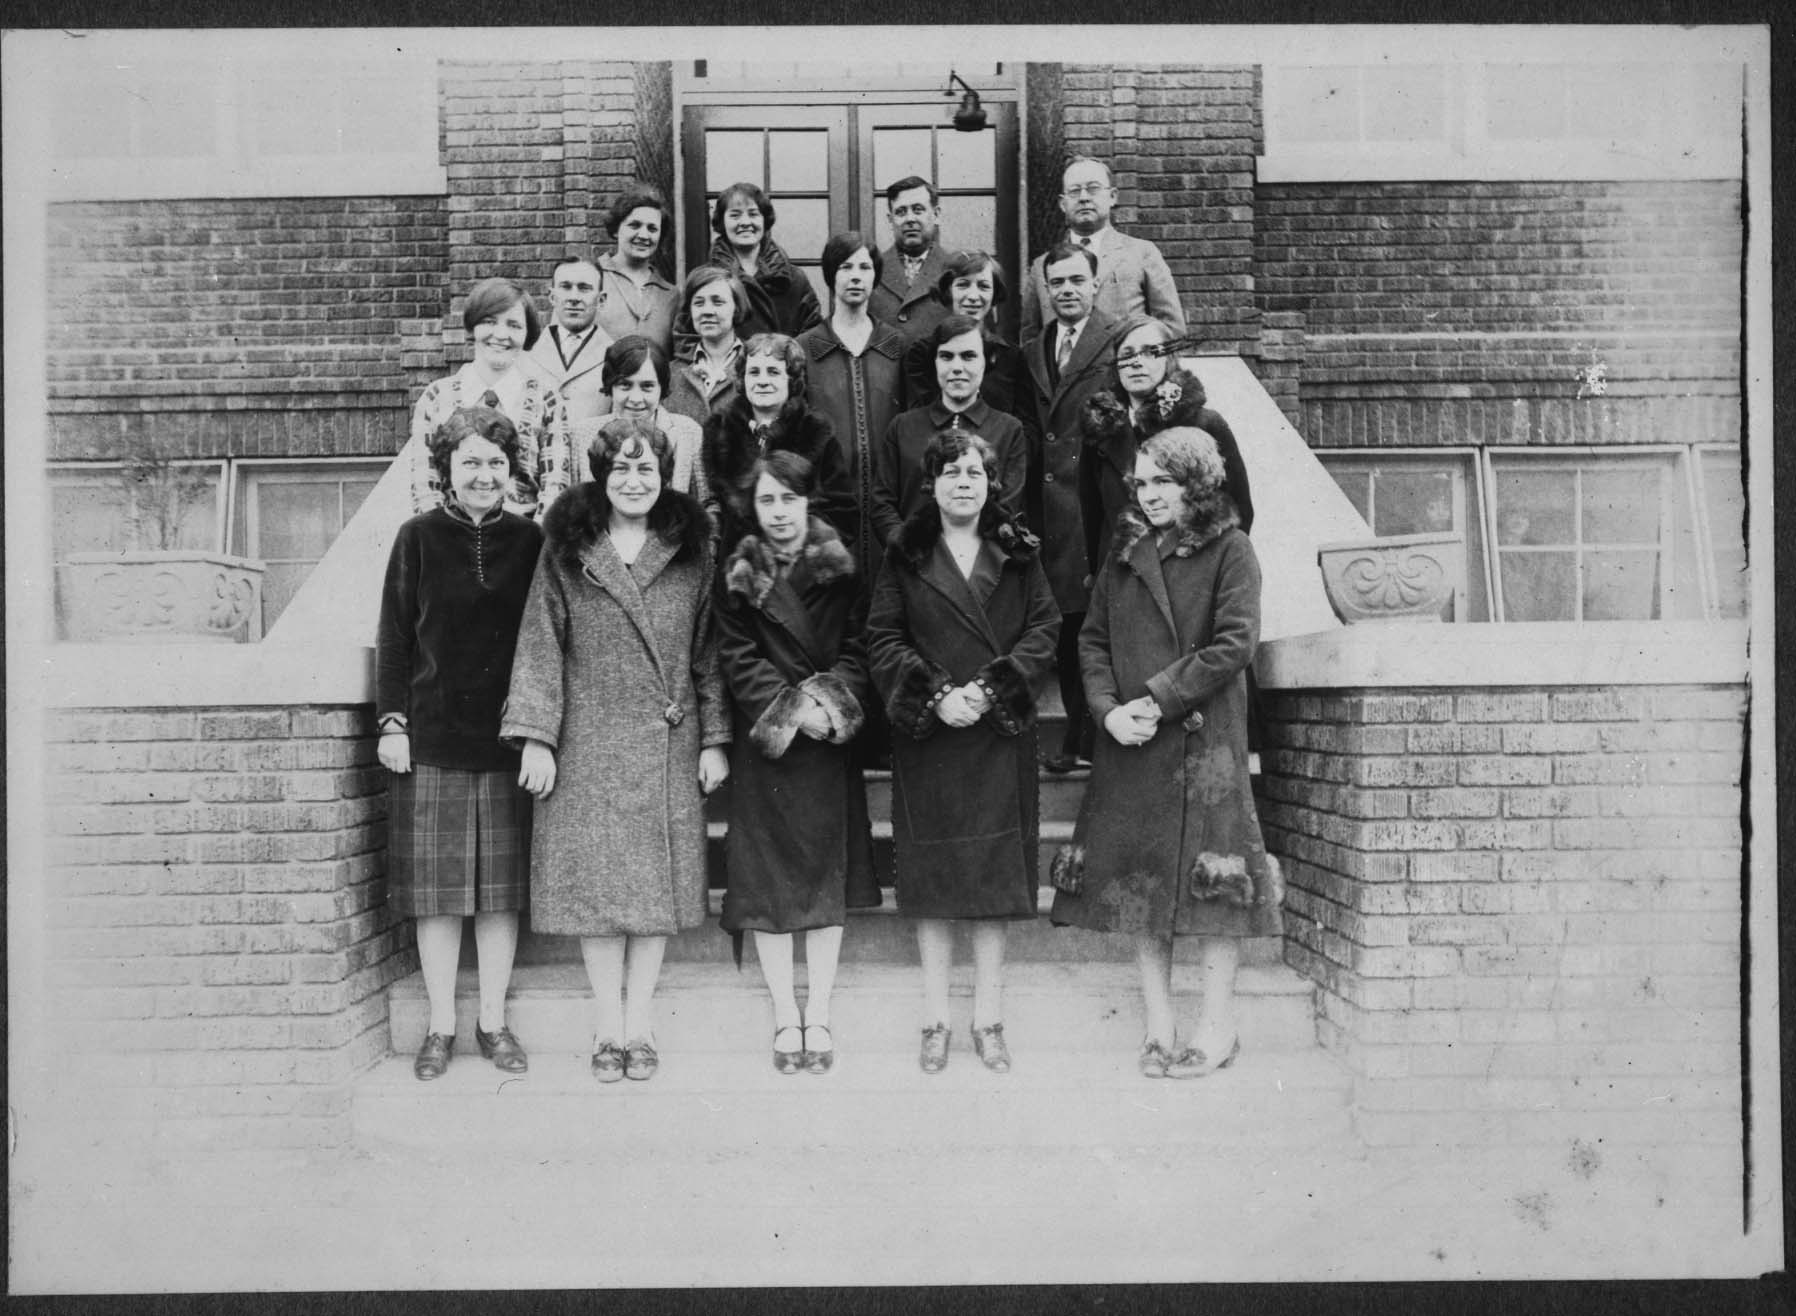 The teachers at Tech High stand in front of the school for this 1926 photograph. First Row: Mabel Underwood, Mary Sossoman, Lottie Ona Barkley, Aubin Wert, Thelma Ashworth. Second Row: Helen McManus, Carolyn May, Ruth Brawley, Ruth Kohn, Helen Dodds. Third Row: O.P. Littell, Nattye McNinch, Lula Faye Clegg, Daphne Ransom, S. L. Gunderson. Fourth Row: Stella Kittles, Maie Myers, N.F. Collage and Forest T. Selby.